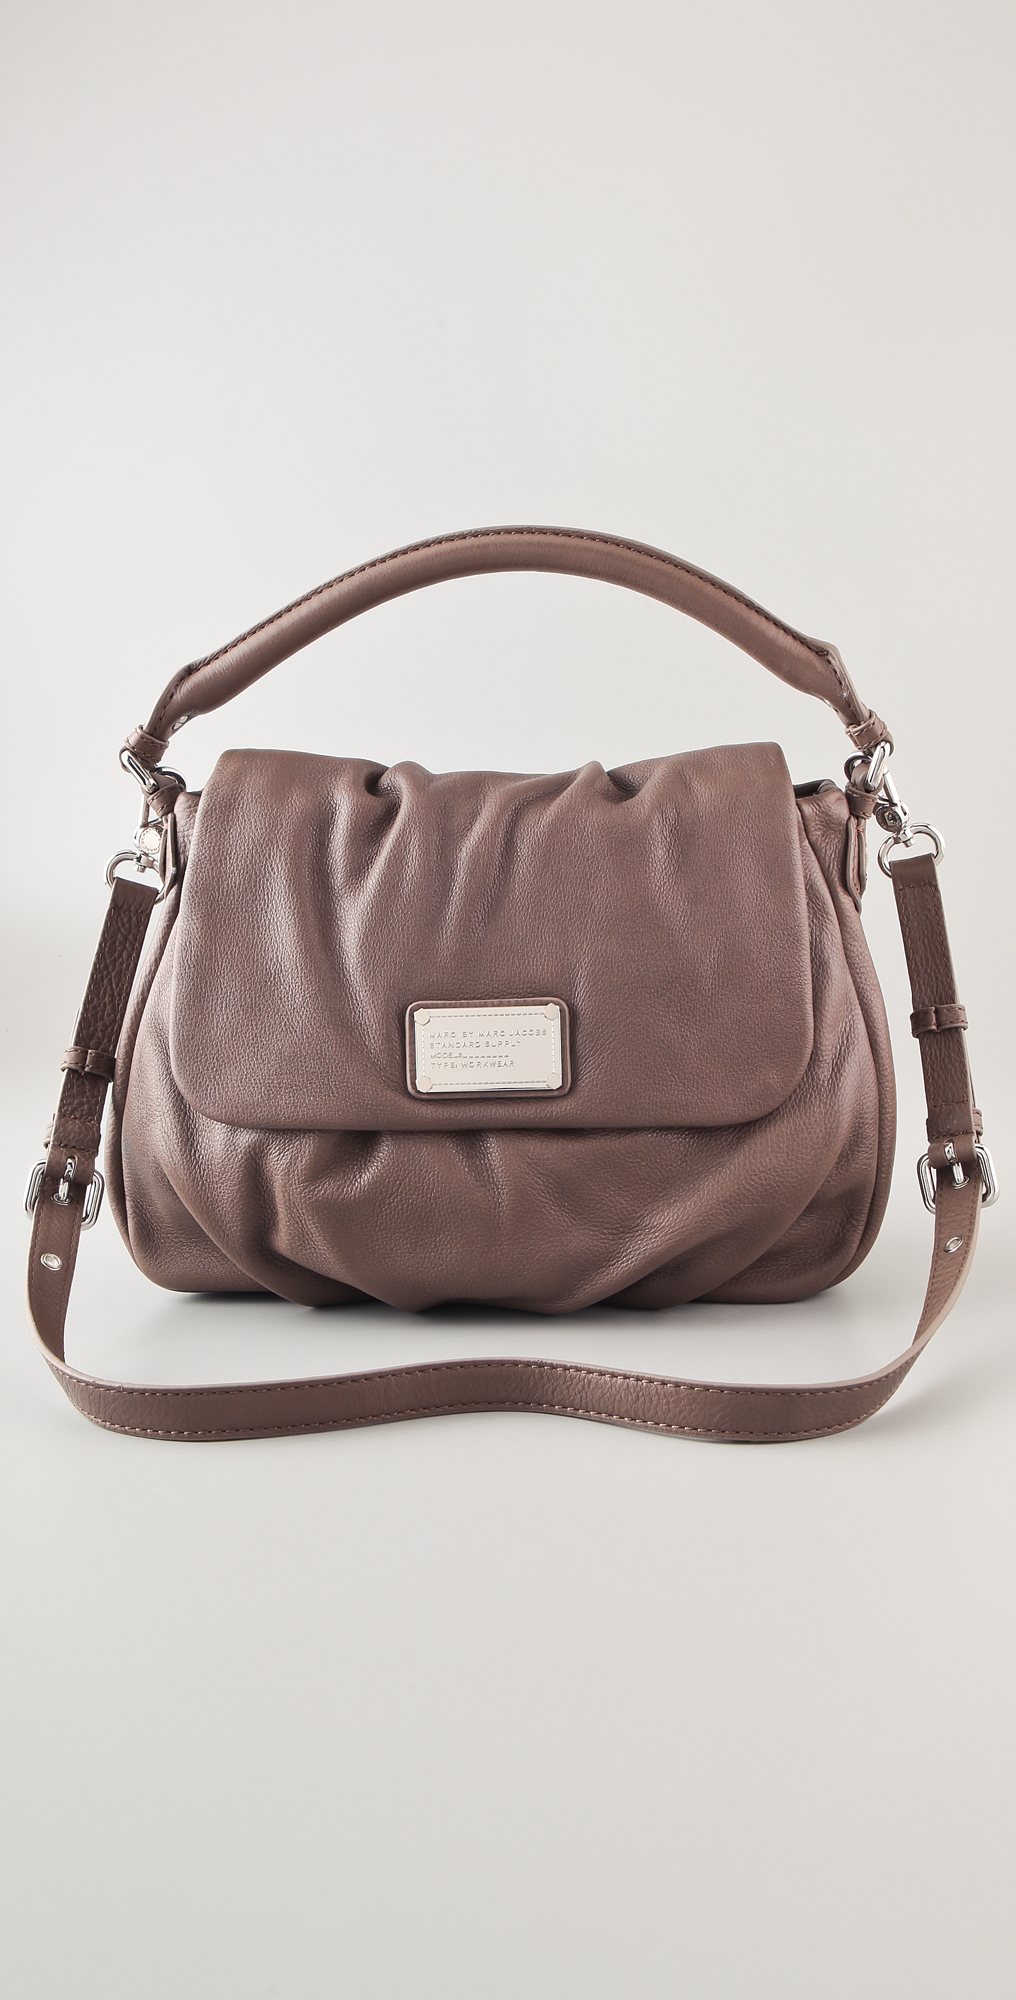 Lyst - Marc By Marc Jacobs Classic Q Lil Ukita Bag in Brown